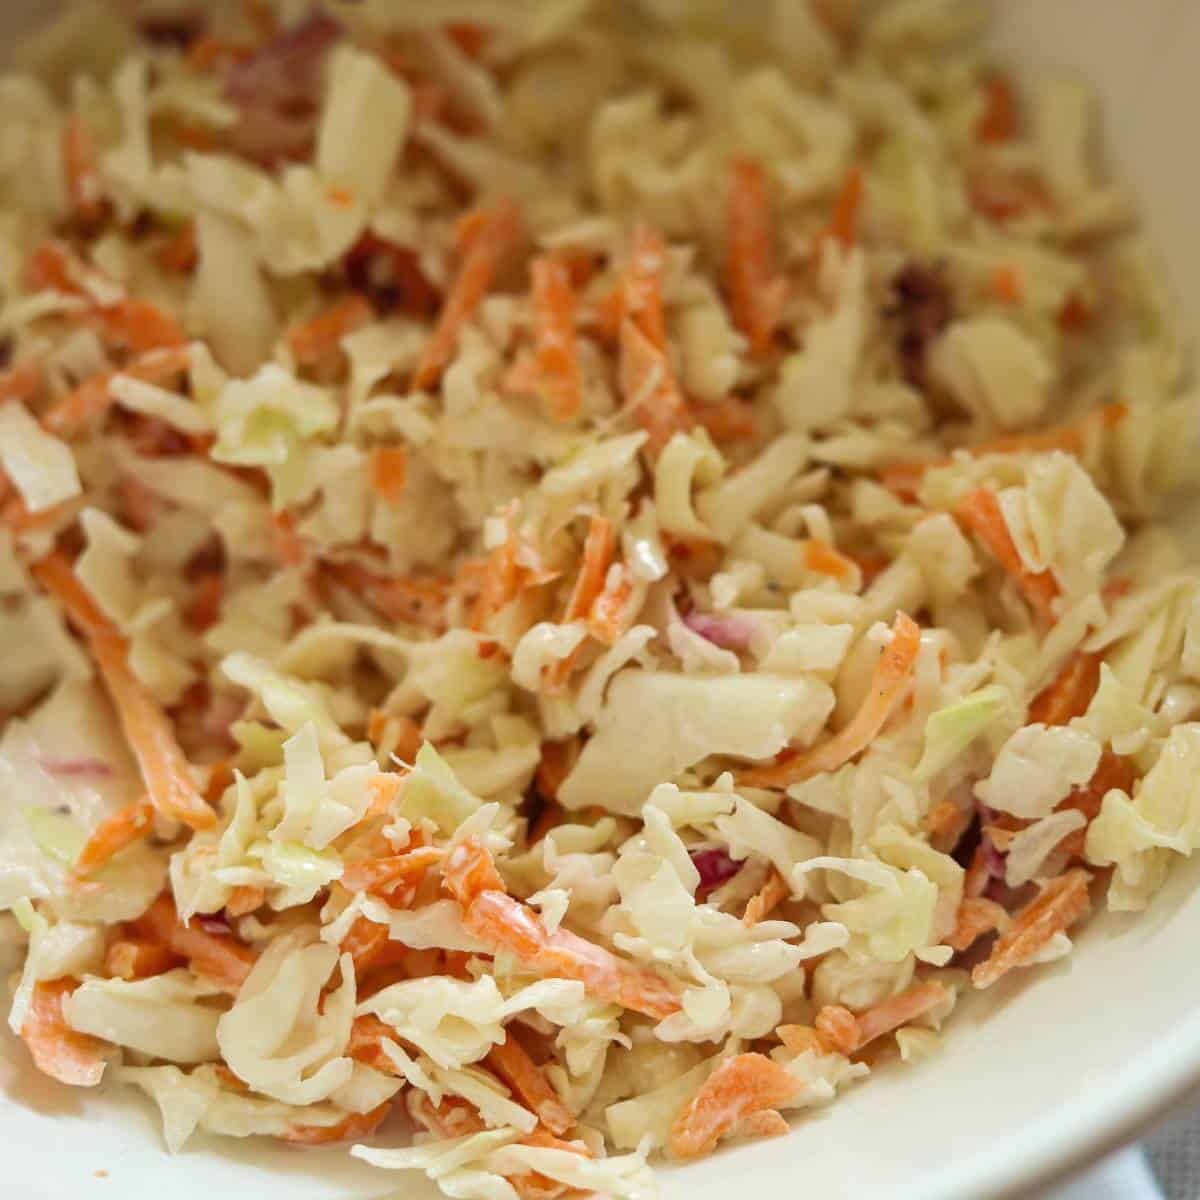 Pulled pork coleslaw in a white bowl.